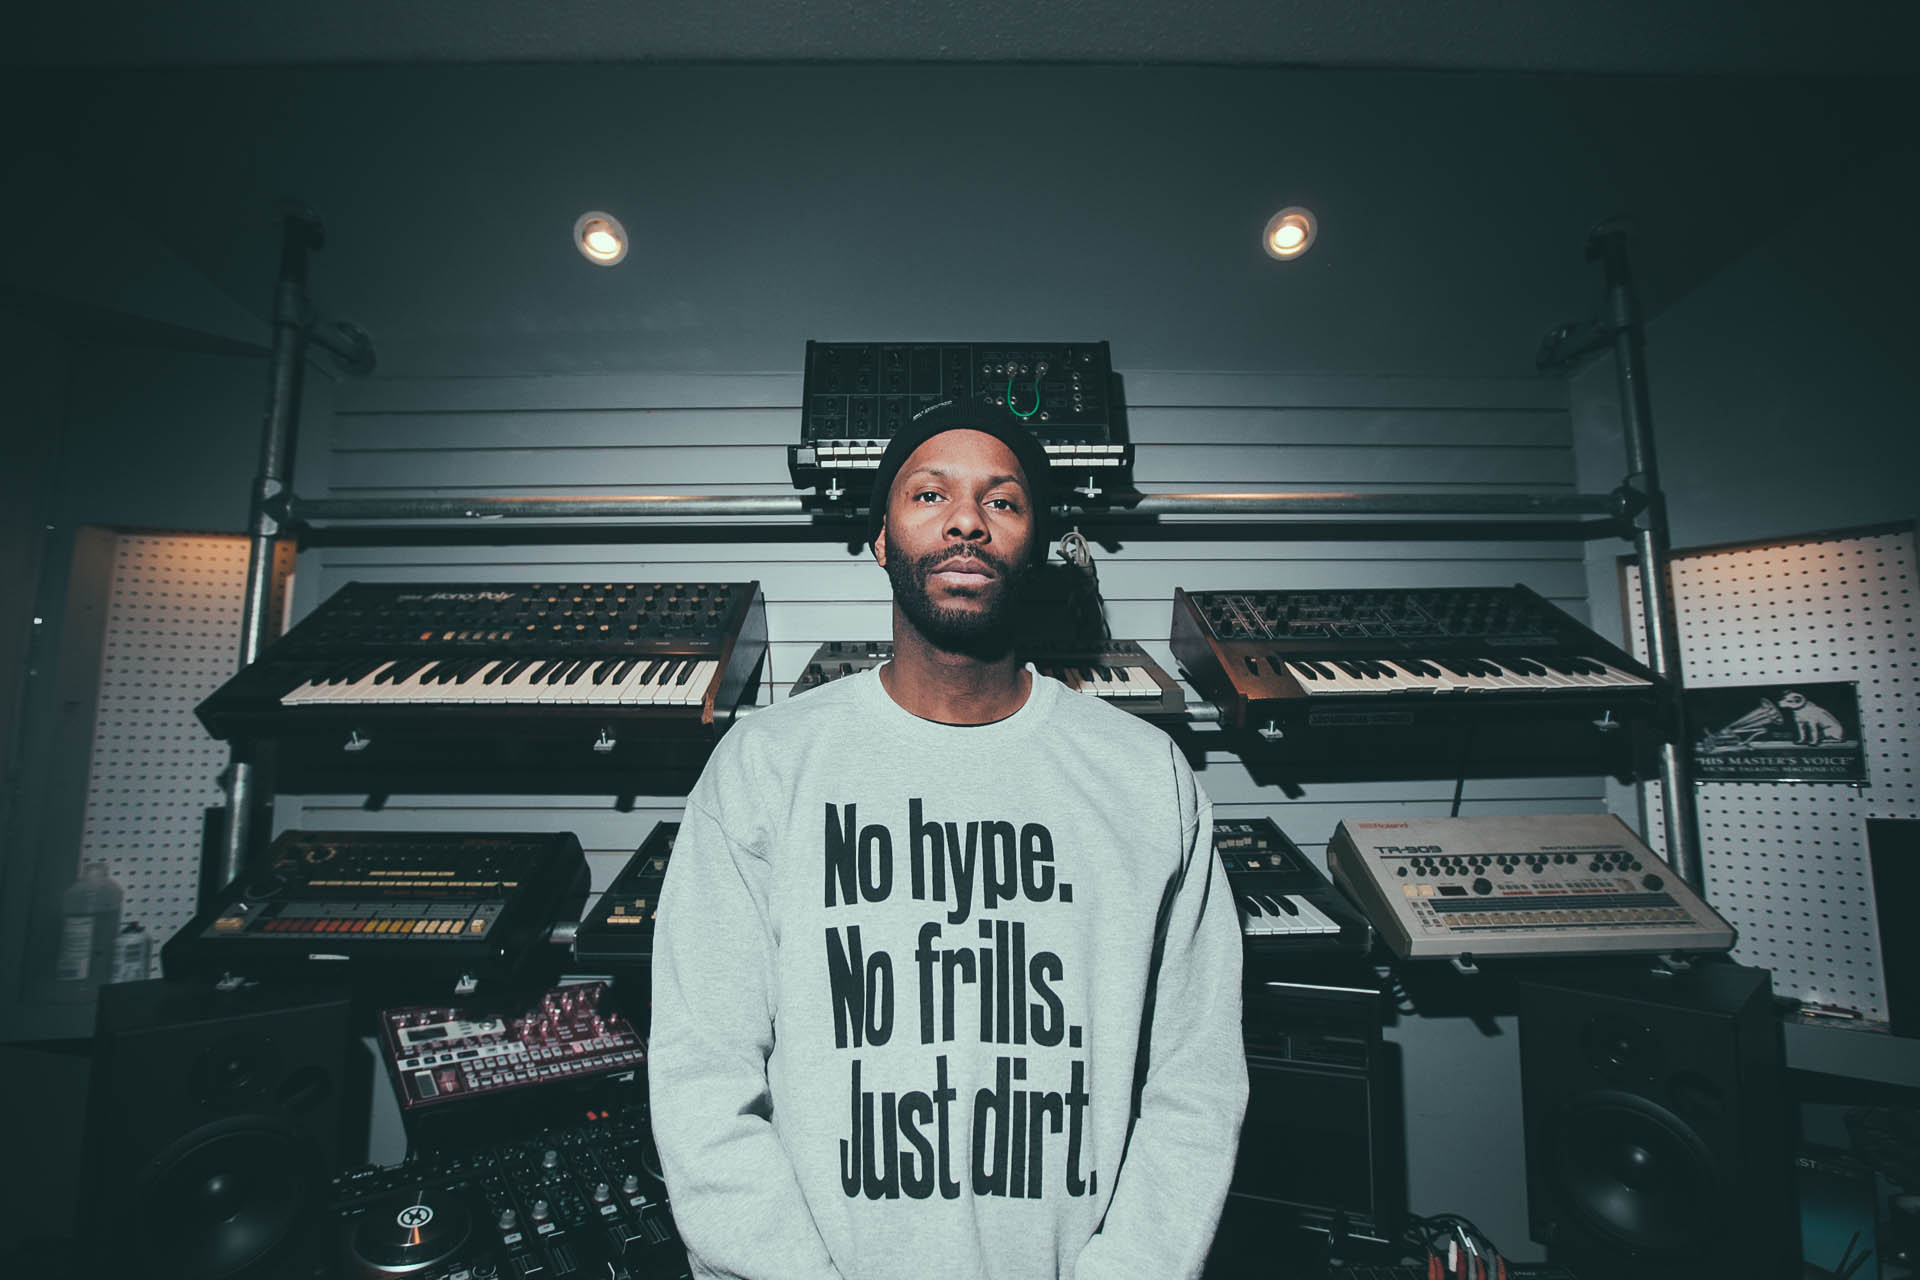 Waajeed standing in front of a collection of synthesizers, looking straight into the camera